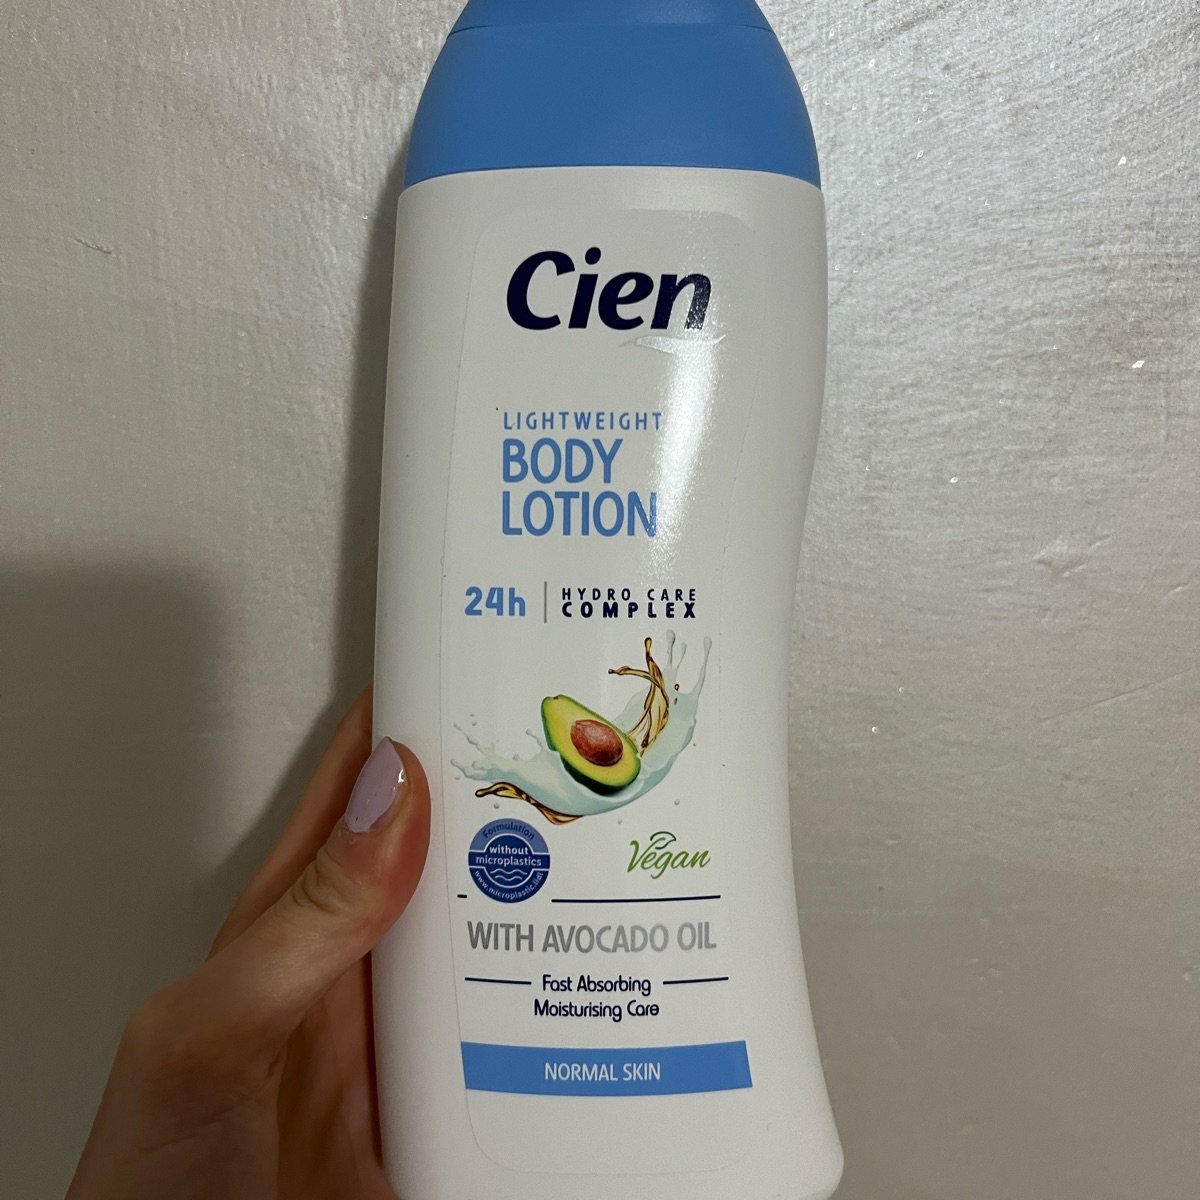 Cien Lightweight Body Lotion with Avocado Oil Reviews | abillion